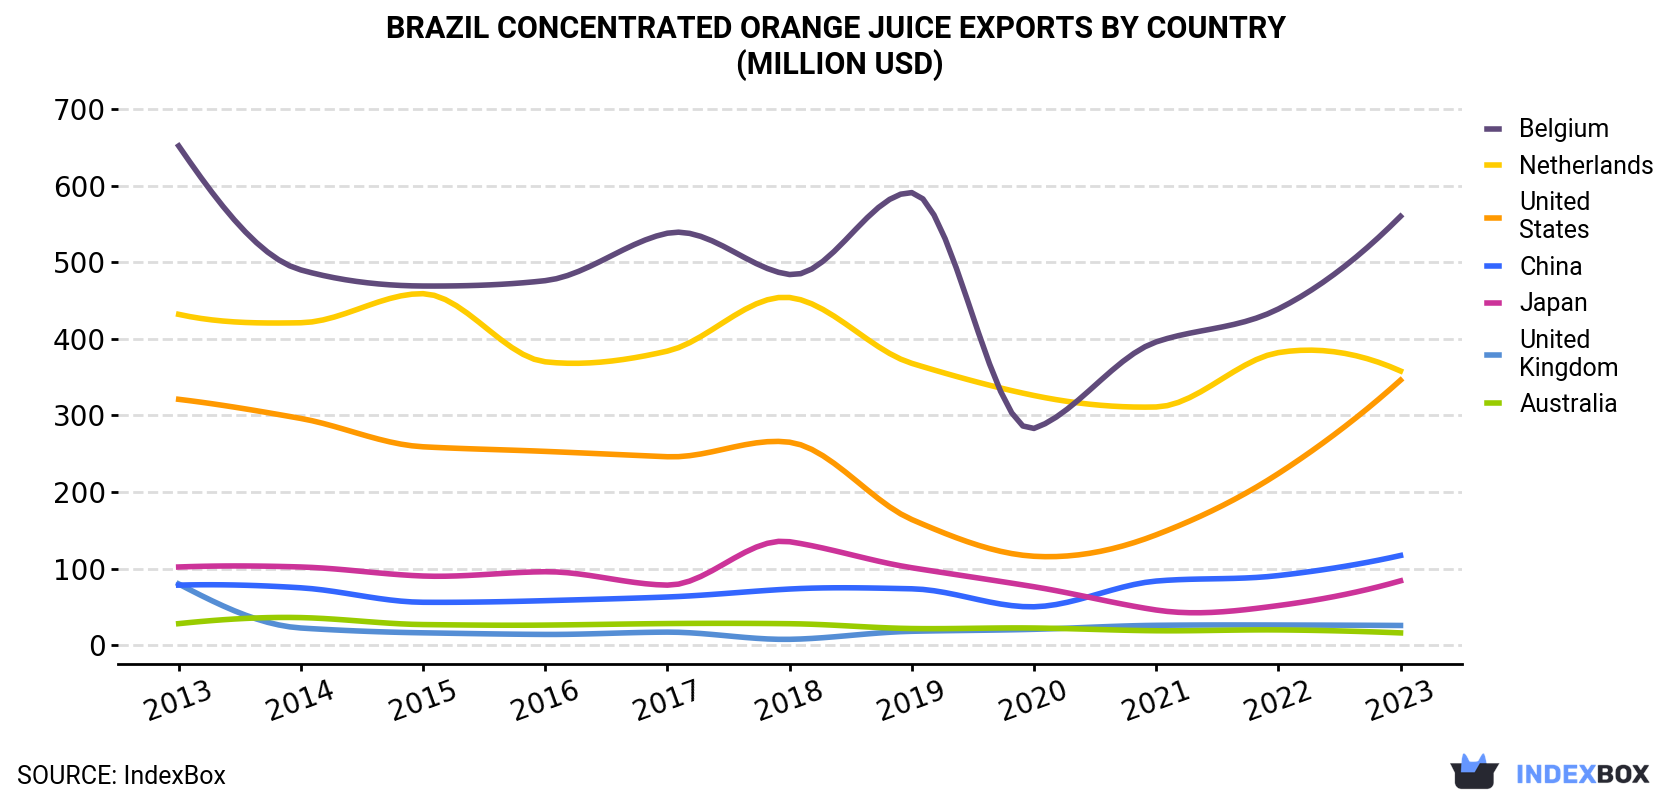 Brazil Concentrated Orange Juice Exports By Country (Million USD)